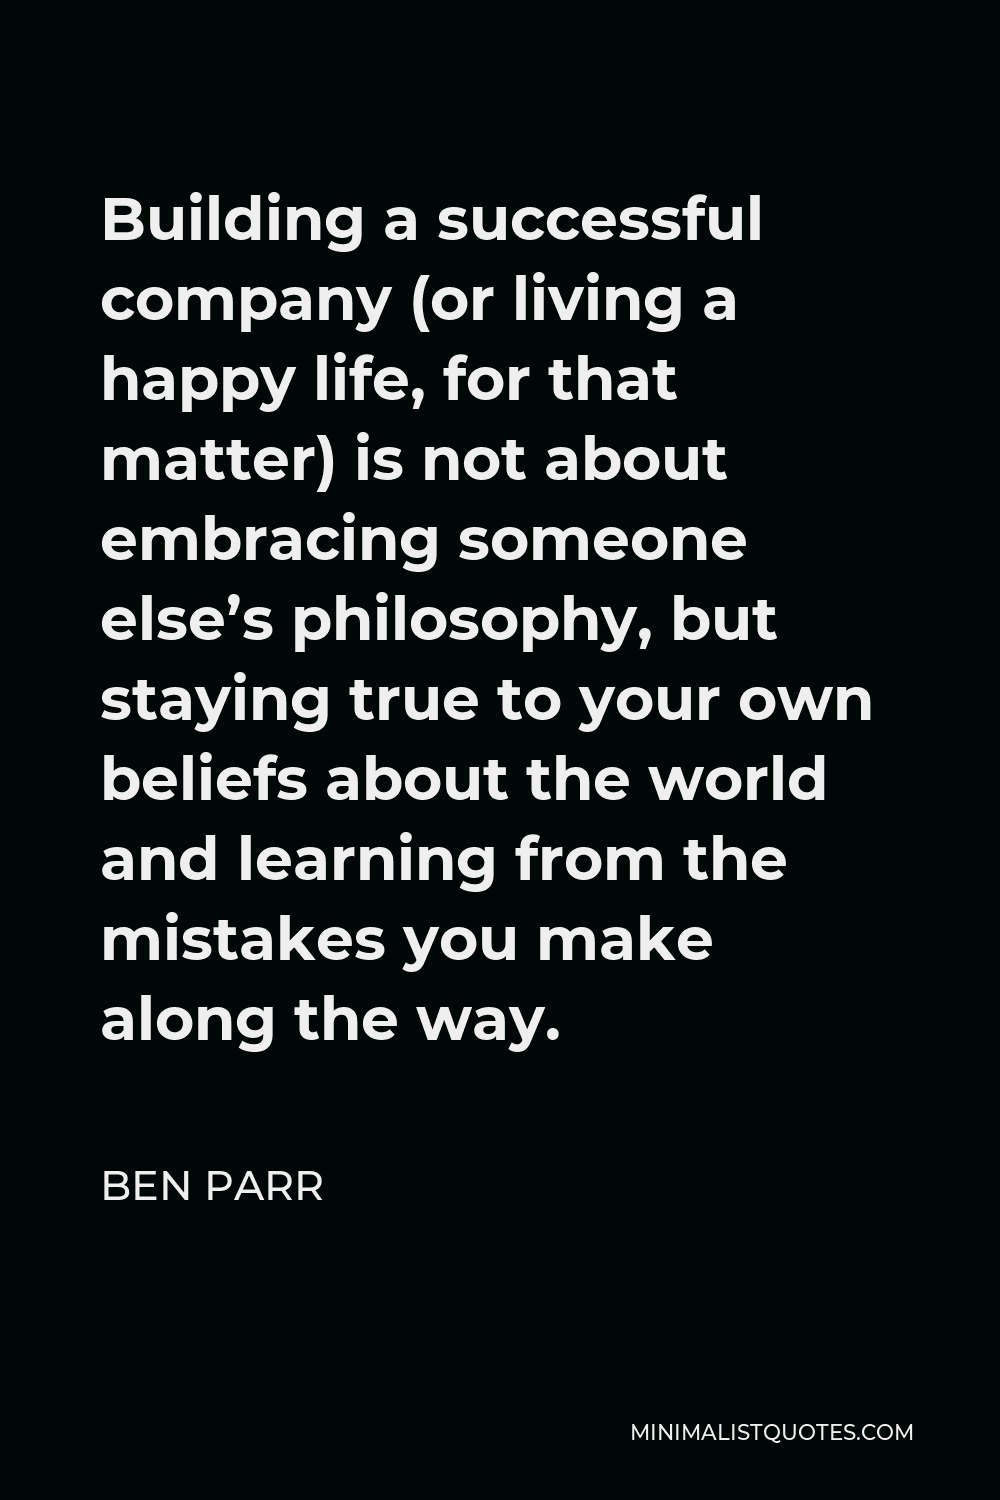 Ben Parr Quote - Building a successful company (or living a happy life, for that matter) is not about embracing someone else’s philosophy, but staying true to your own beliefs about the world and learning from the mistakes you make along the way.